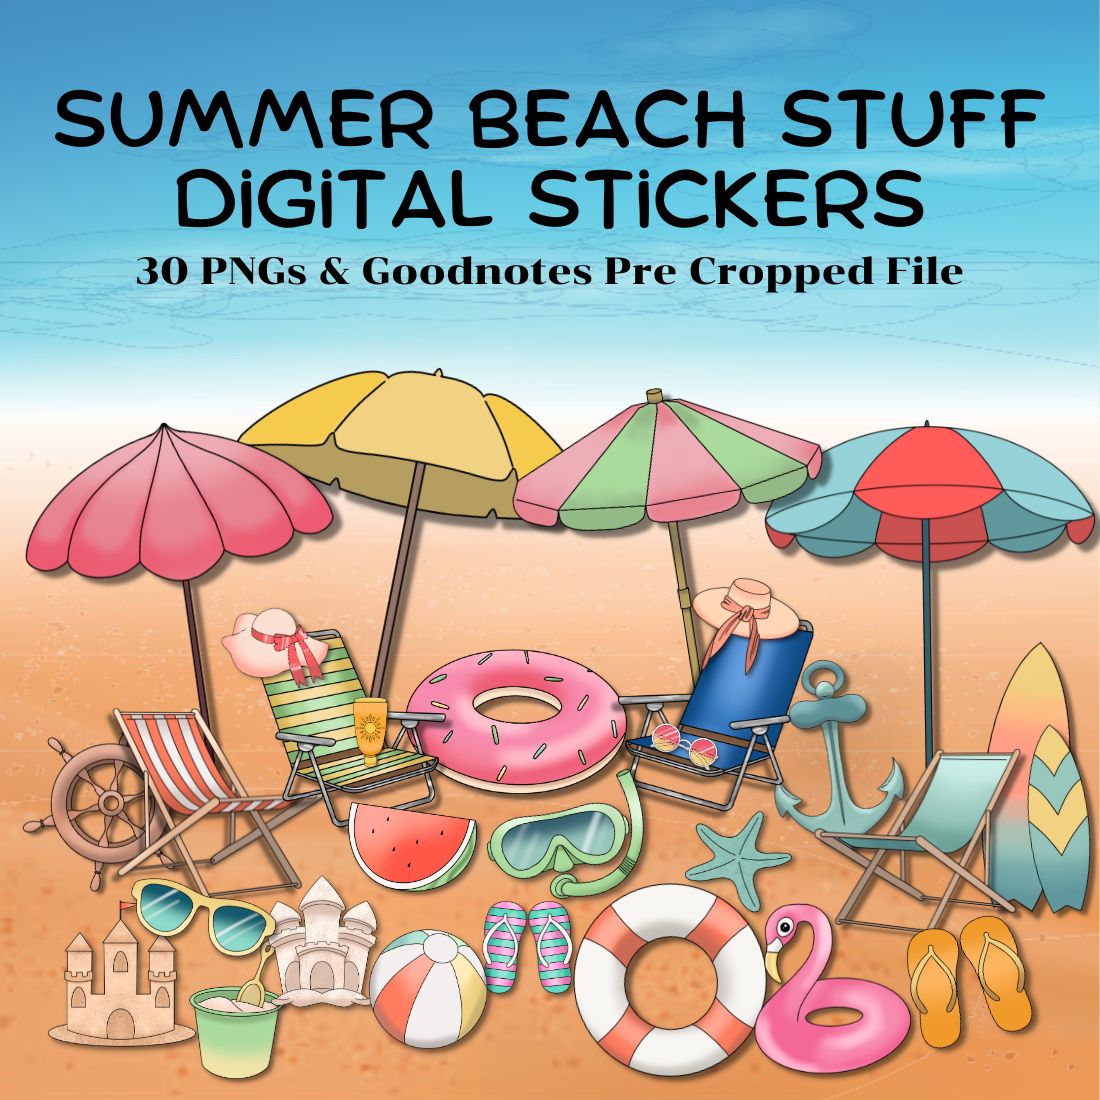 Summer Beach Stuff Digital Stickers - Goodnotes Pre Cropped file & PNG cover image.